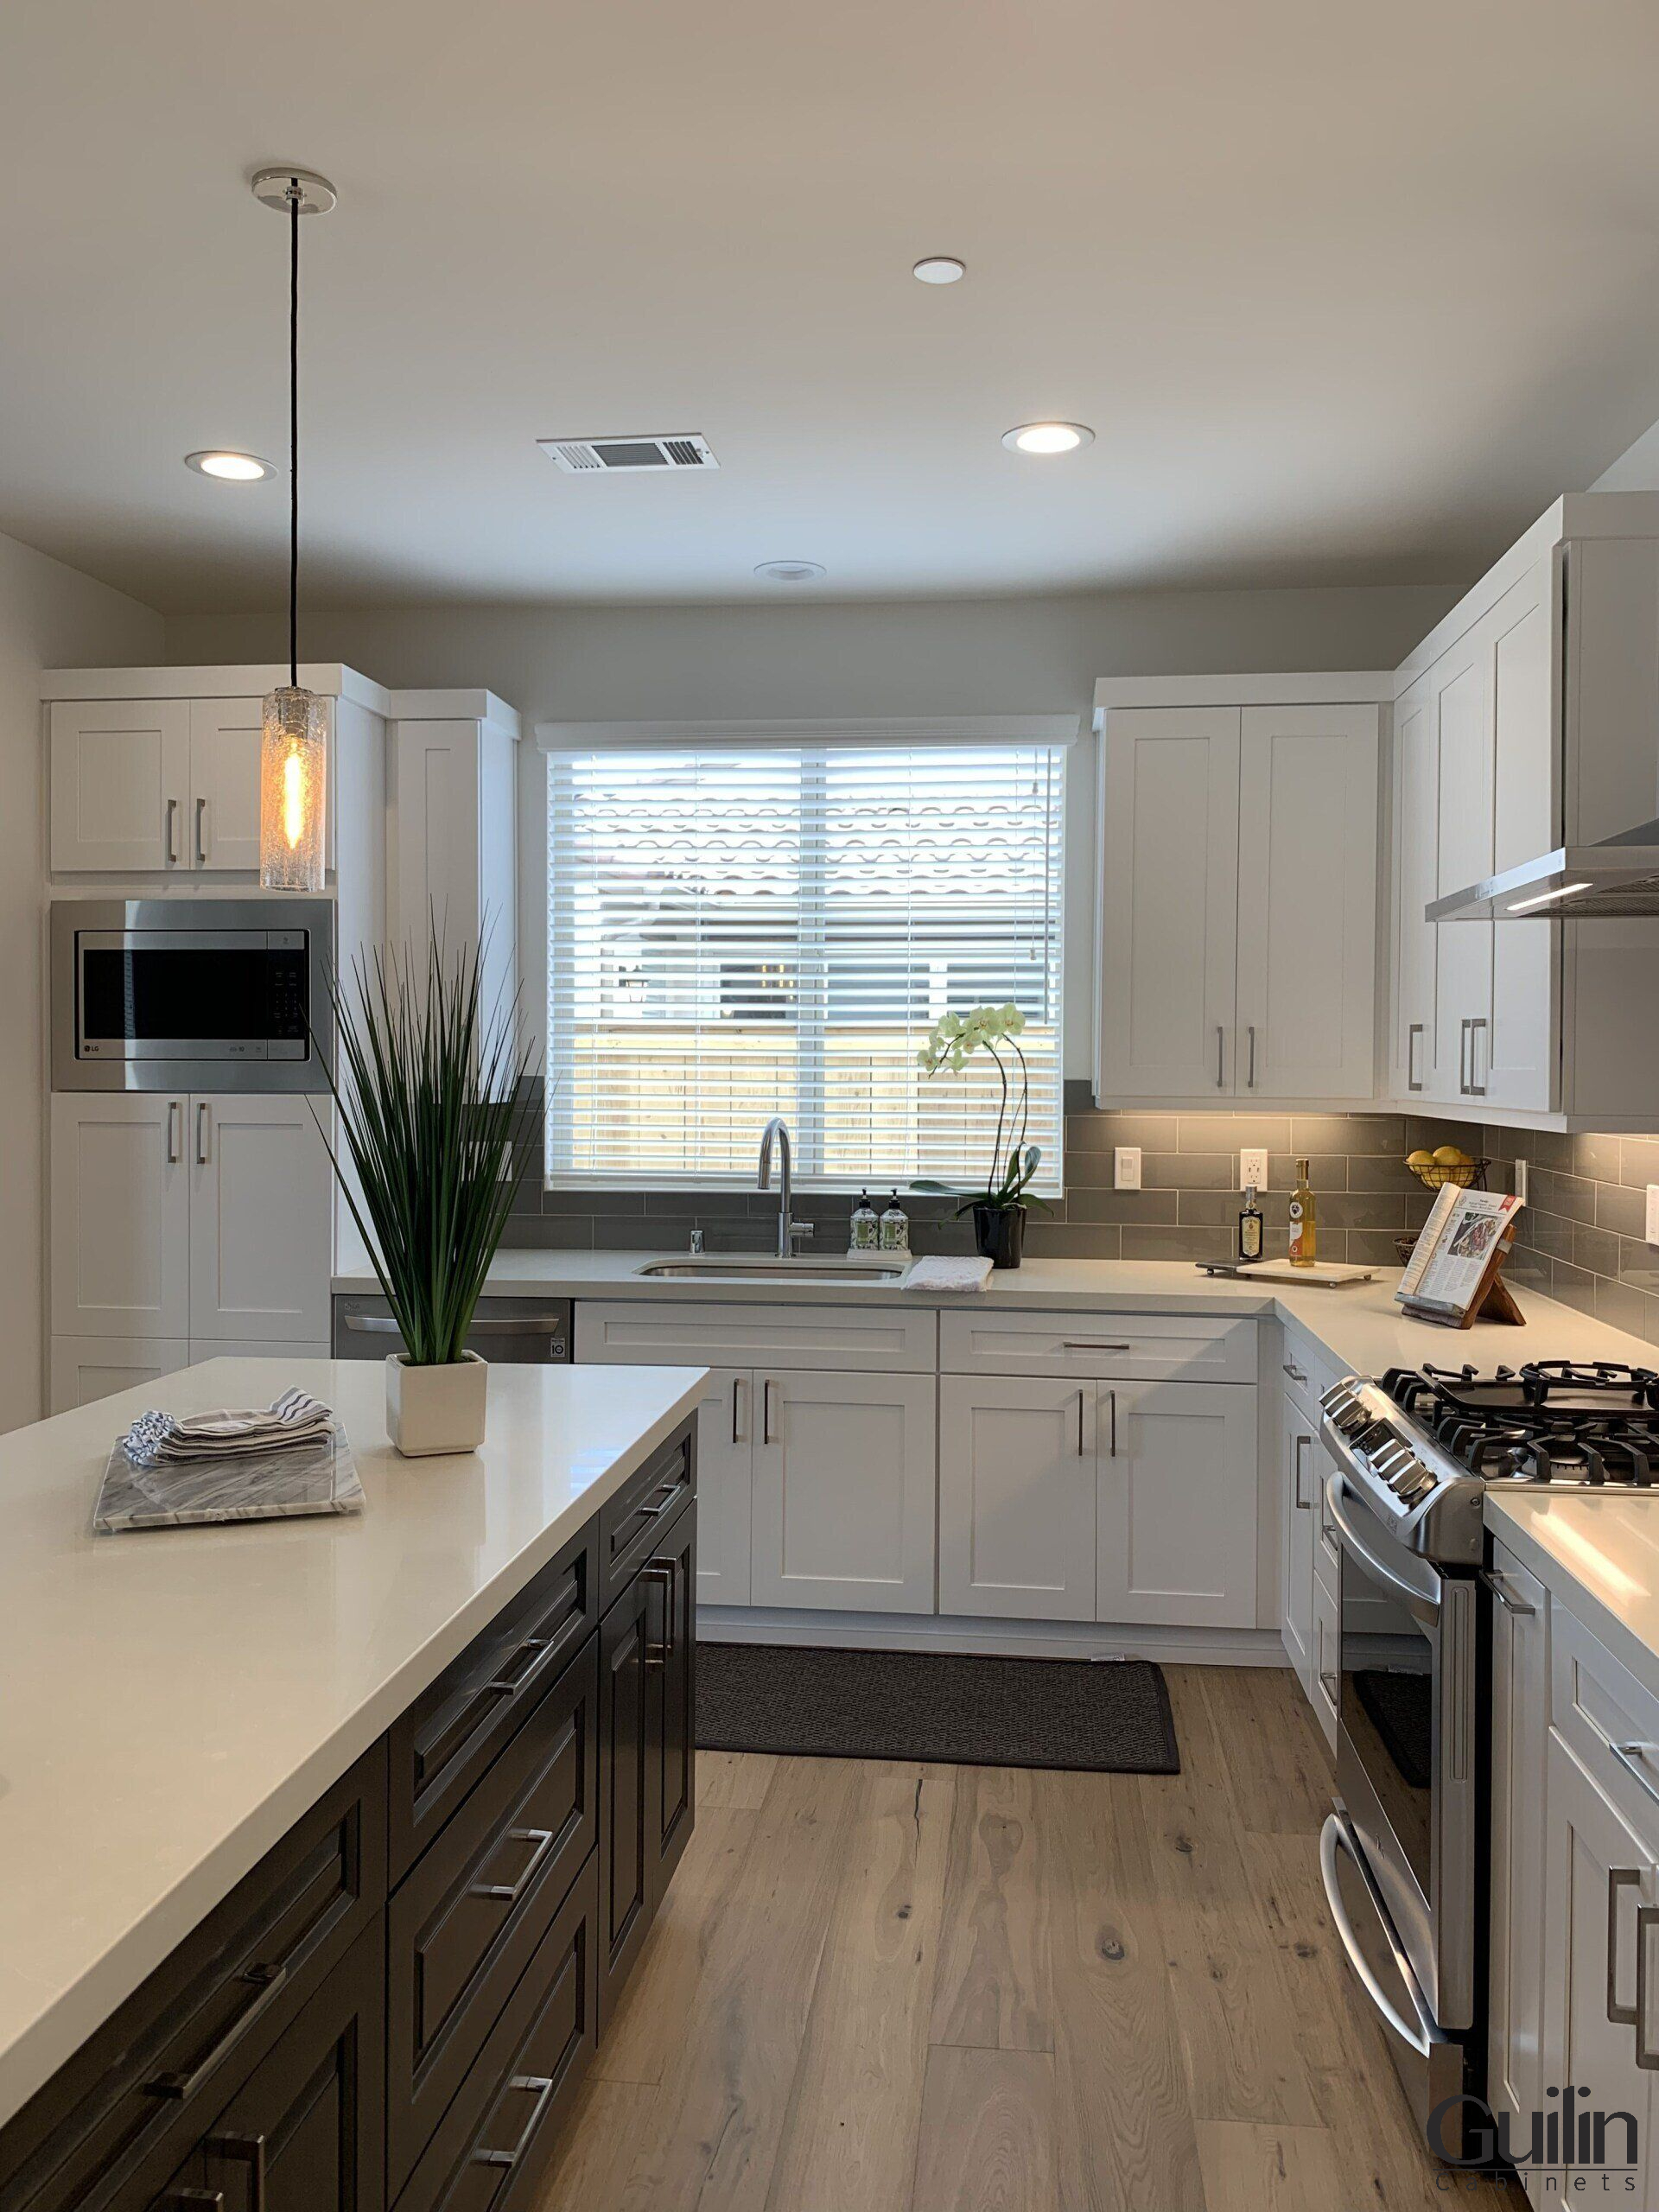 One of the main Pros of an L-shaped kitchen is its flexibility. The two walls of cabinetry and counters provide plenty of space for storage, appliances, and workspace, providing excellent countertop and storage space, making it easy to keep everything close to hand.